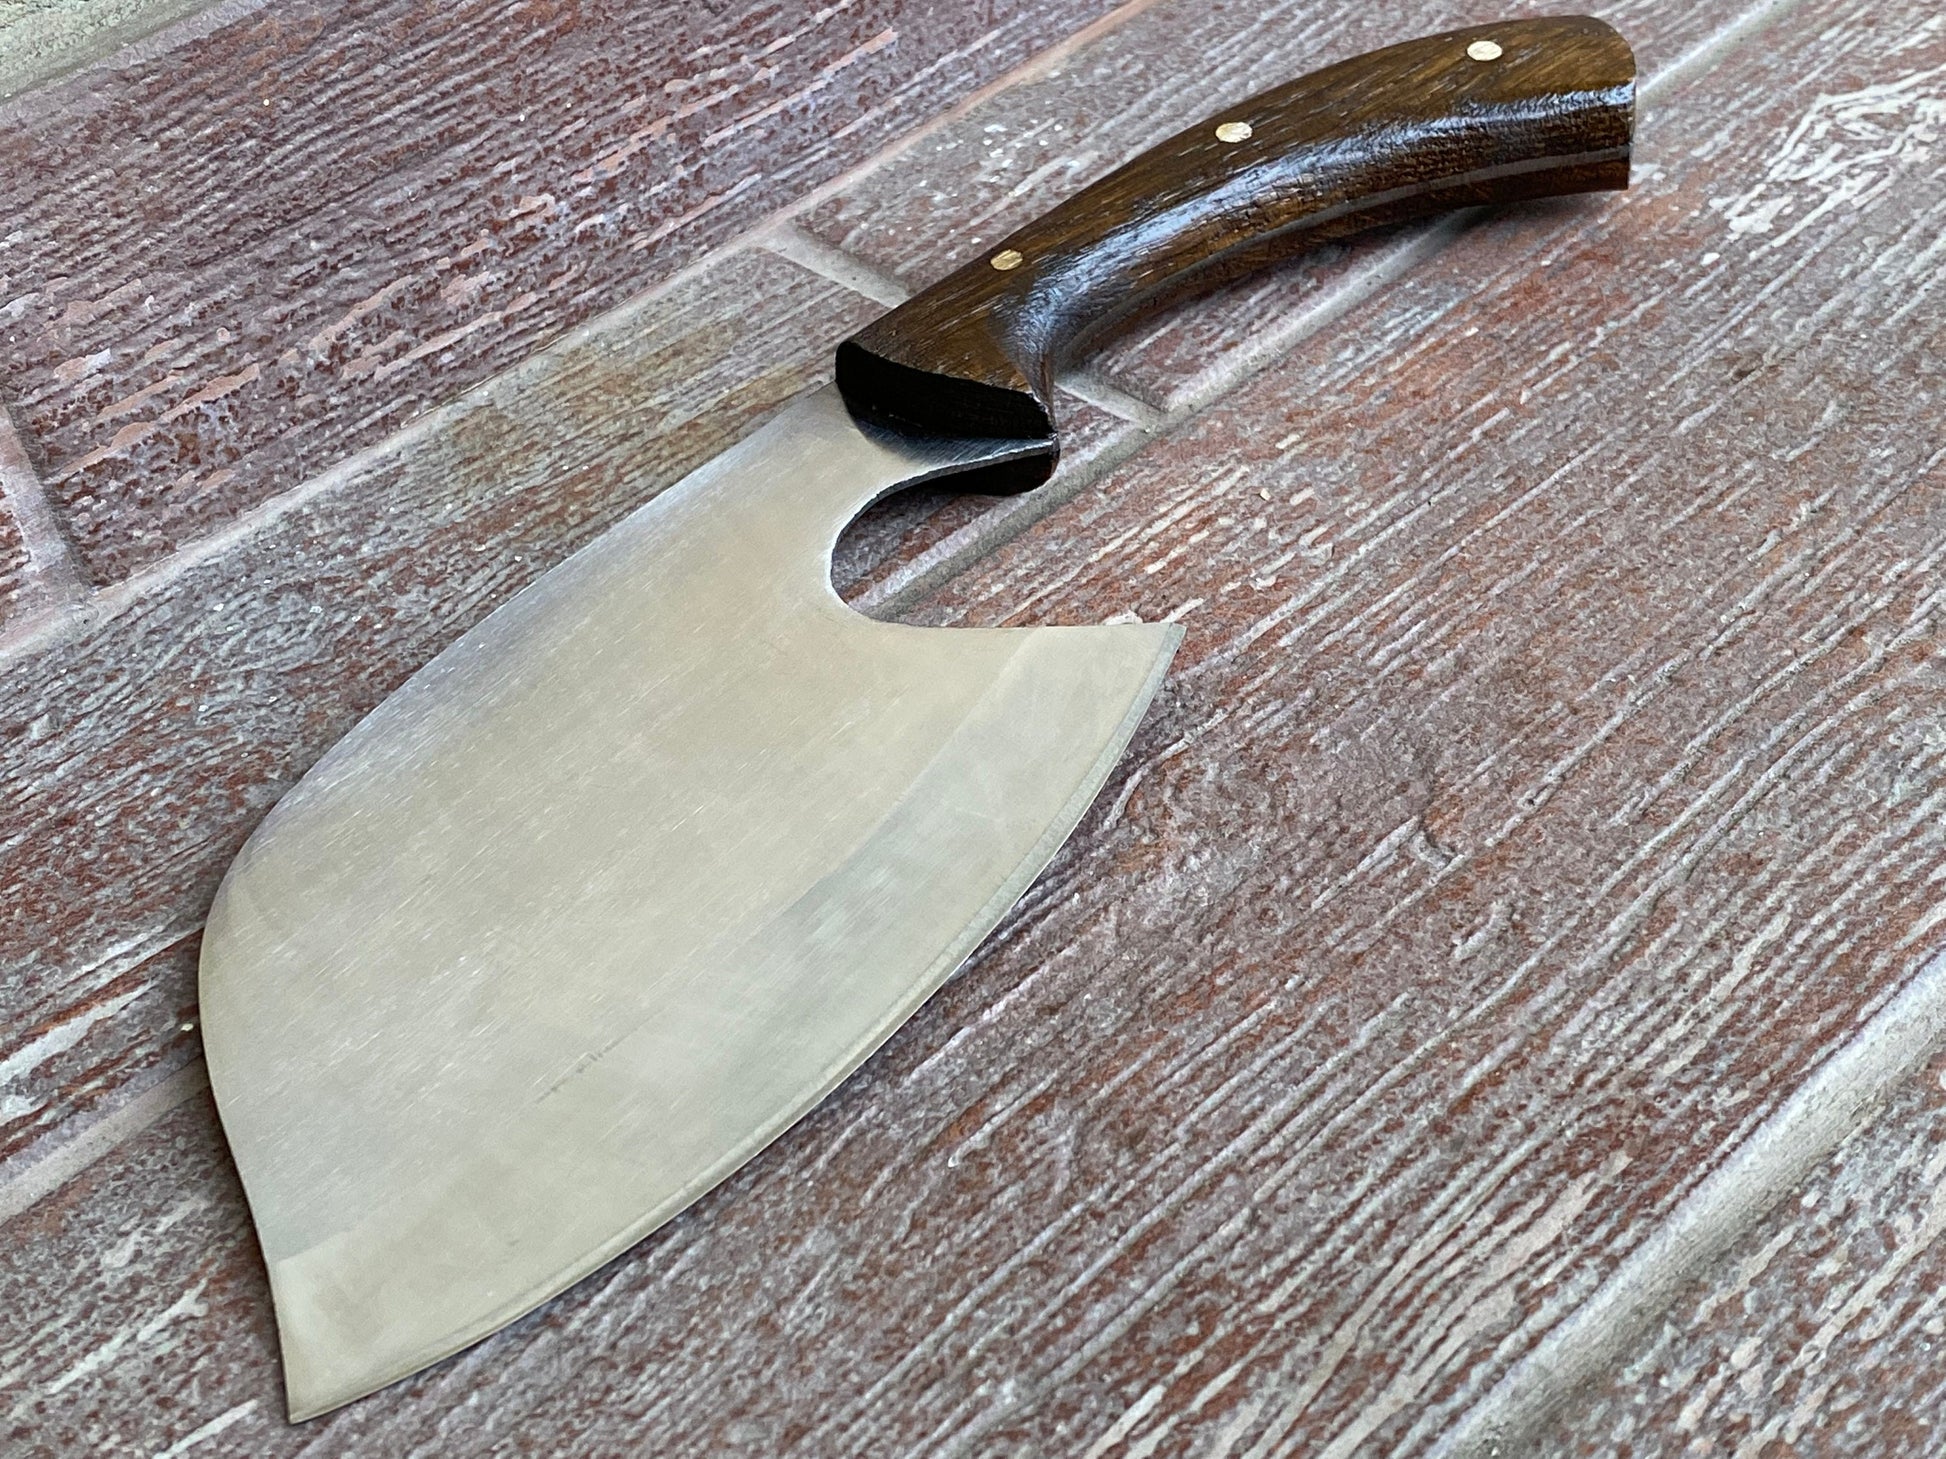 Stainless steel axe, cleaver knife, meat cleaver, meat chopper, butchers knife, steel gift, 11th anniversary, birthday, steel anniversary